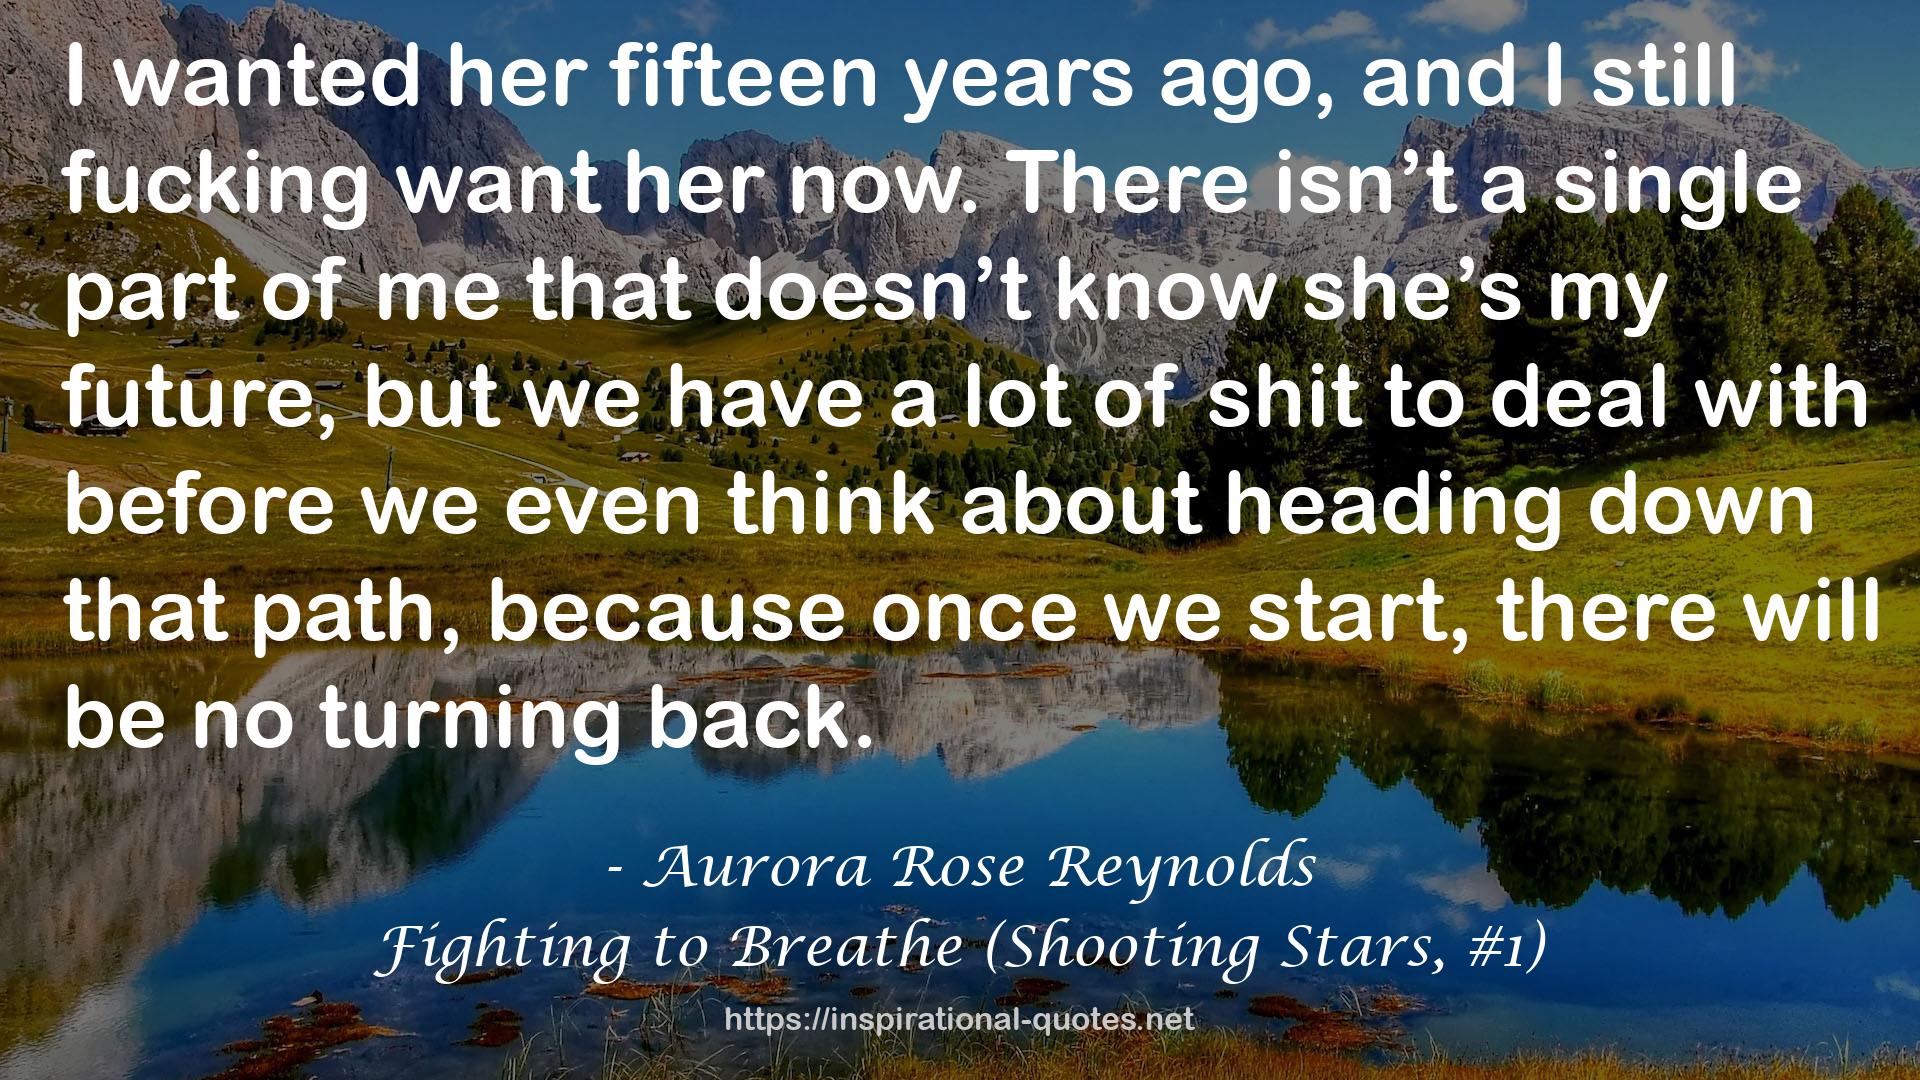 Fighting to Breathe (Shooting Stars, #1) QUOTES